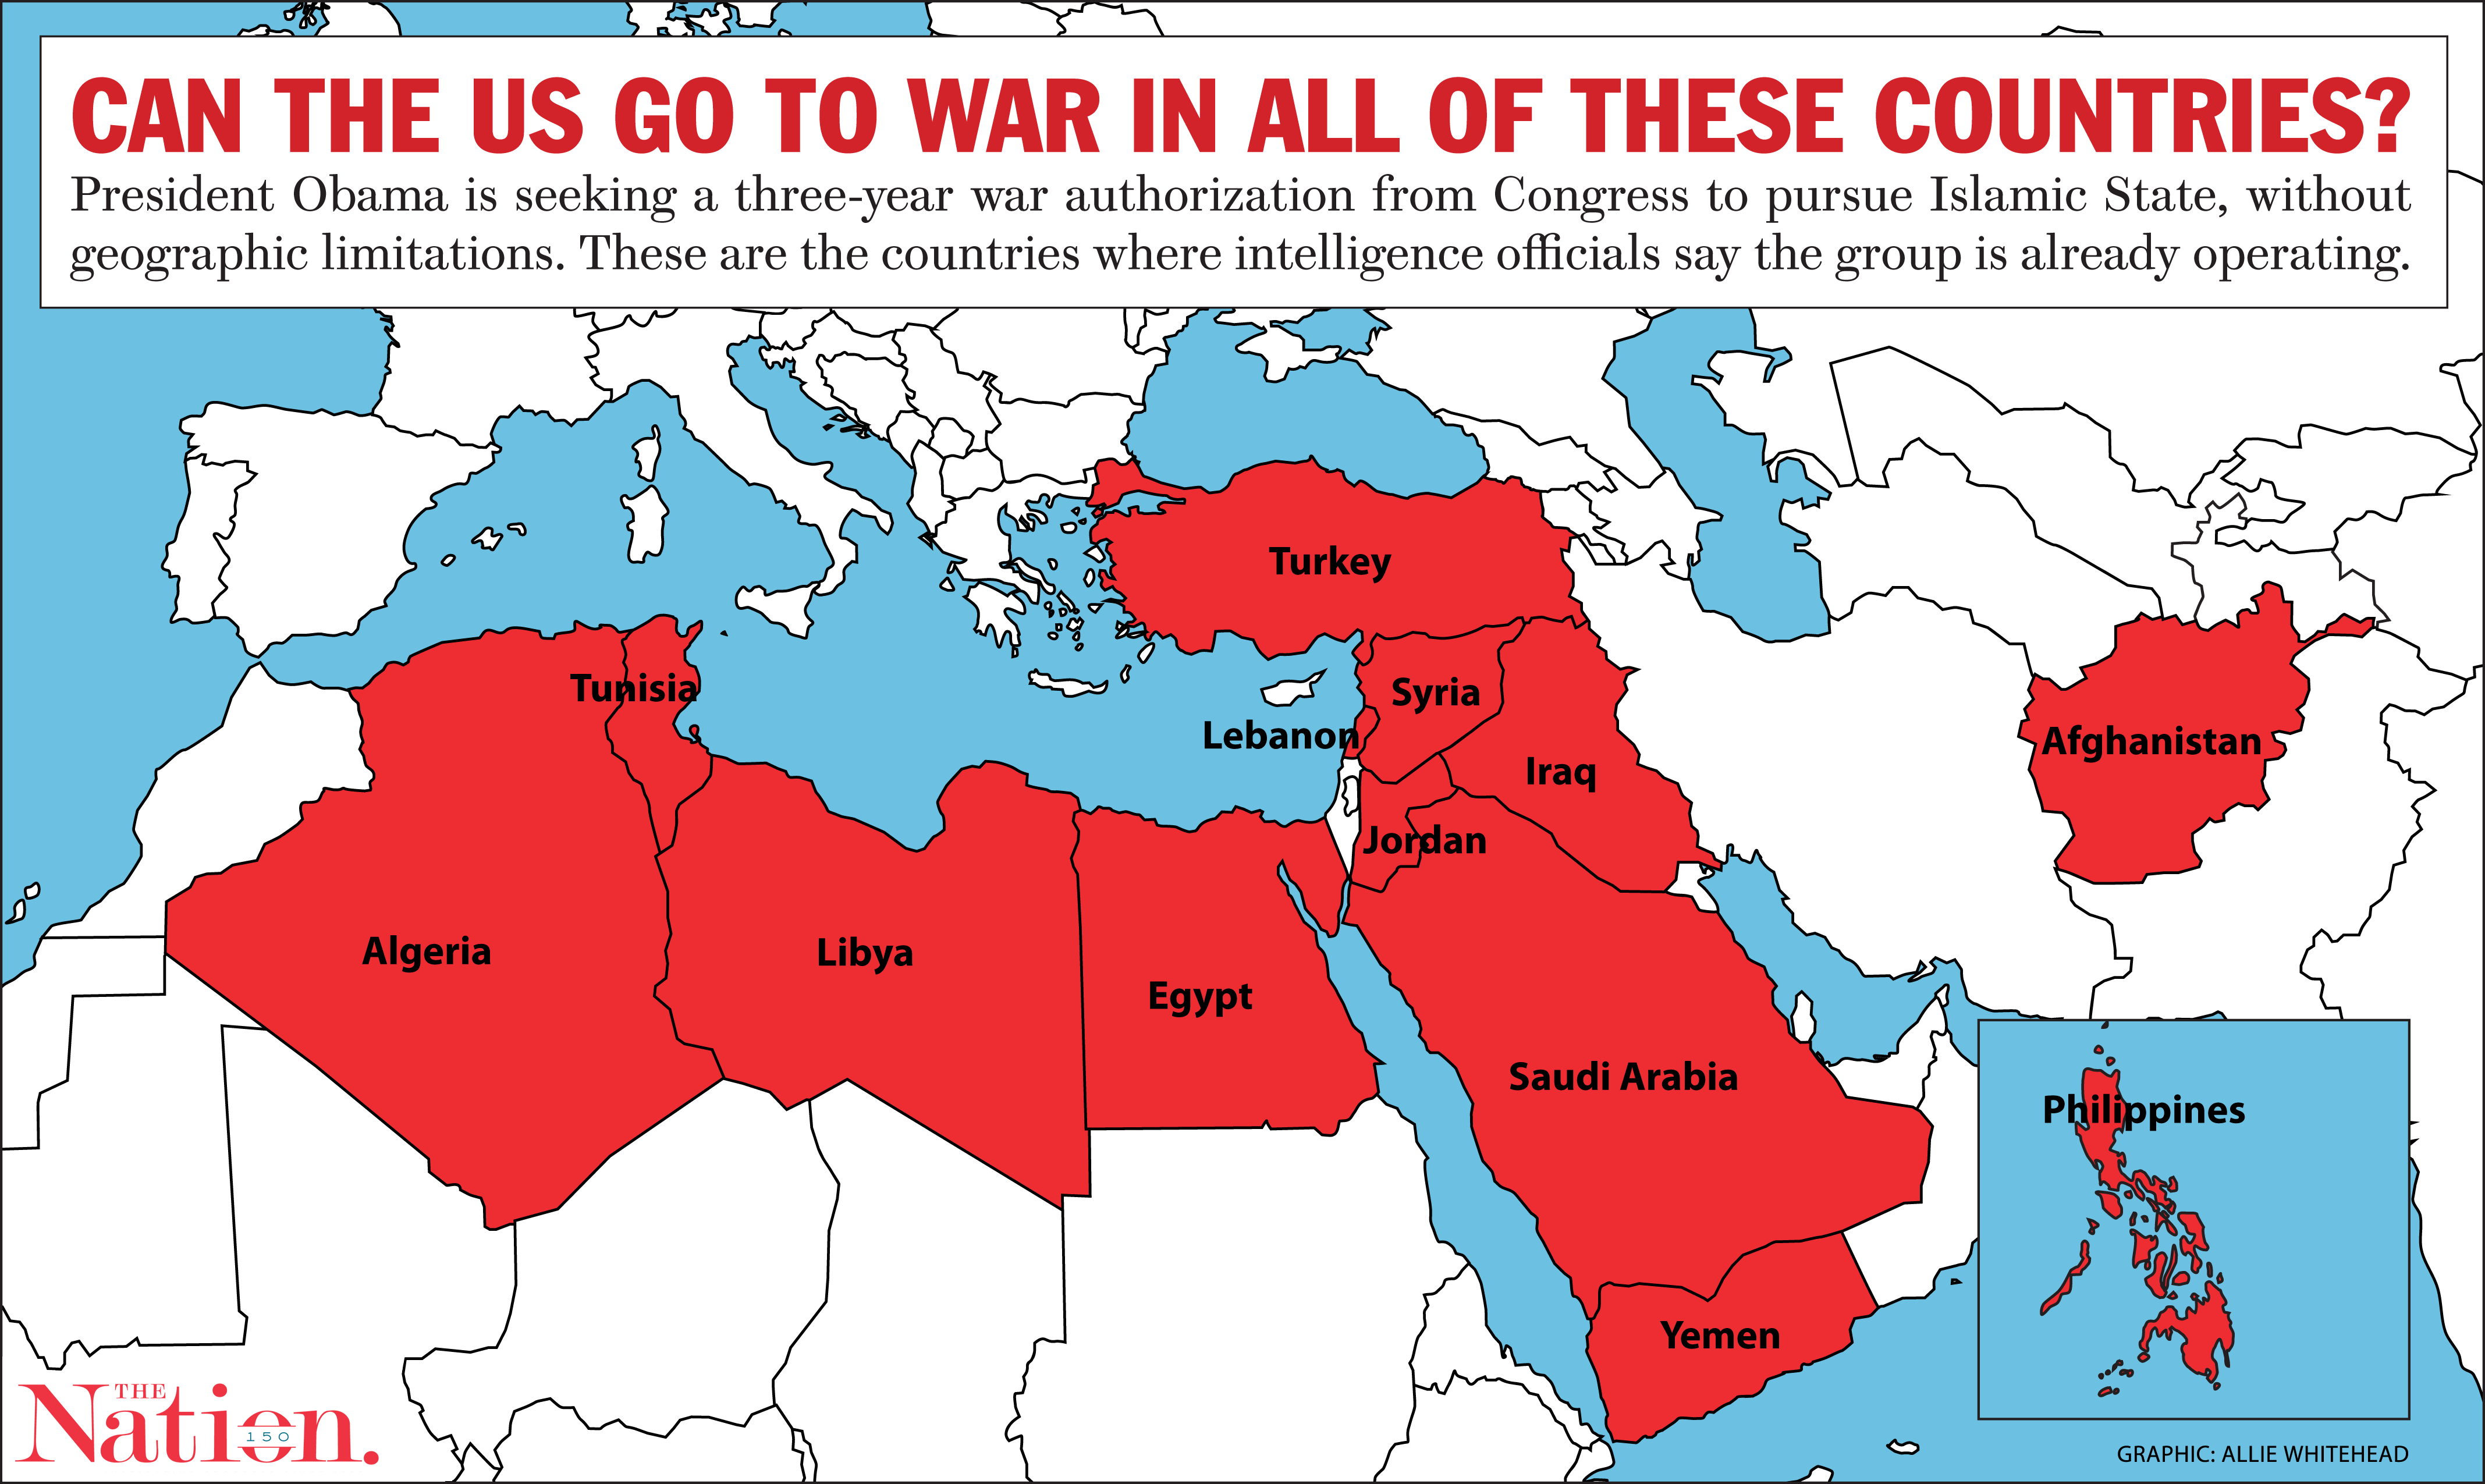 If Congress Passes Obama’s War Request, It Authorizes Operations in All These Countries